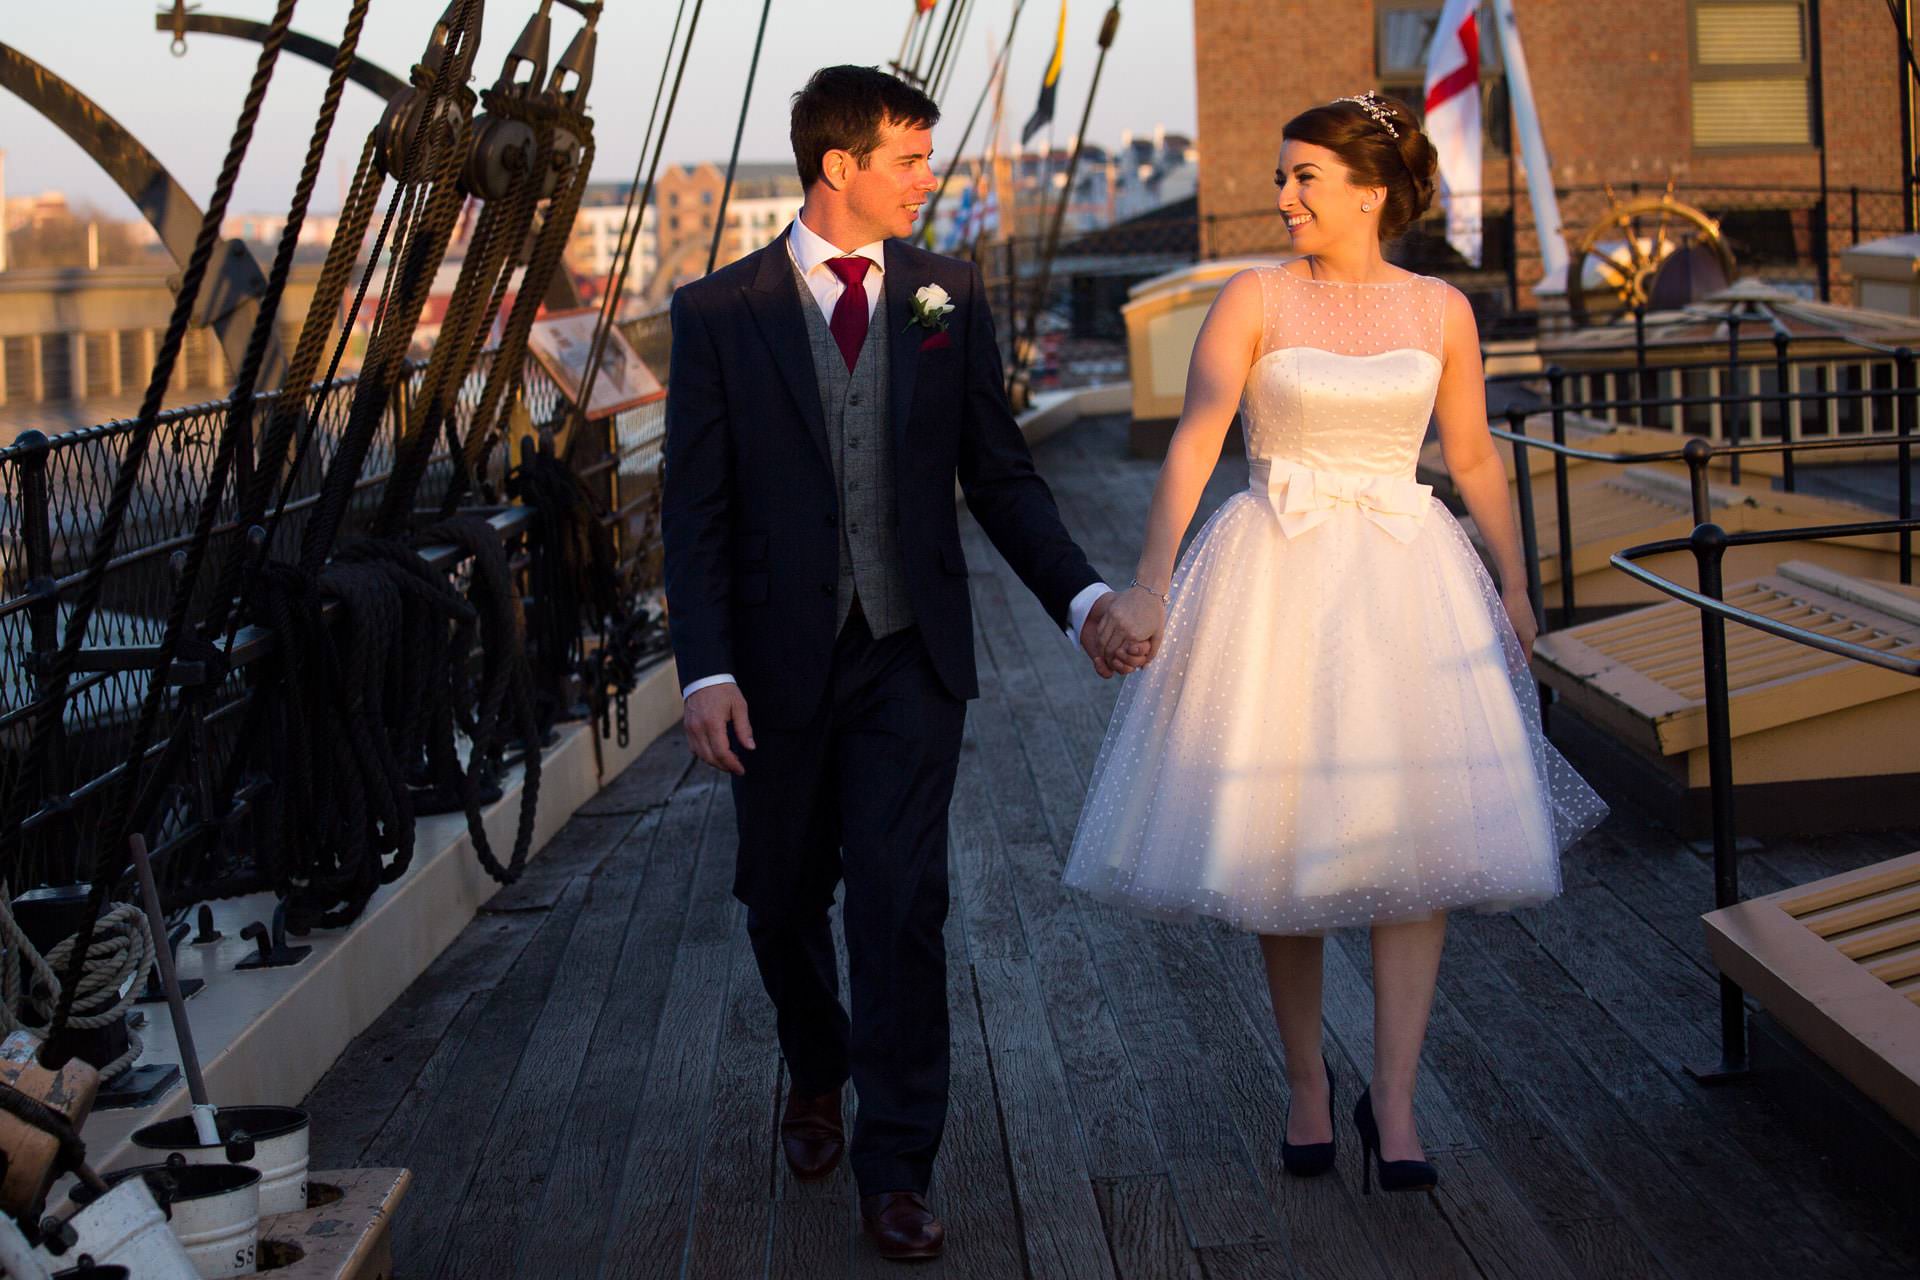 ss great britain wedding photography